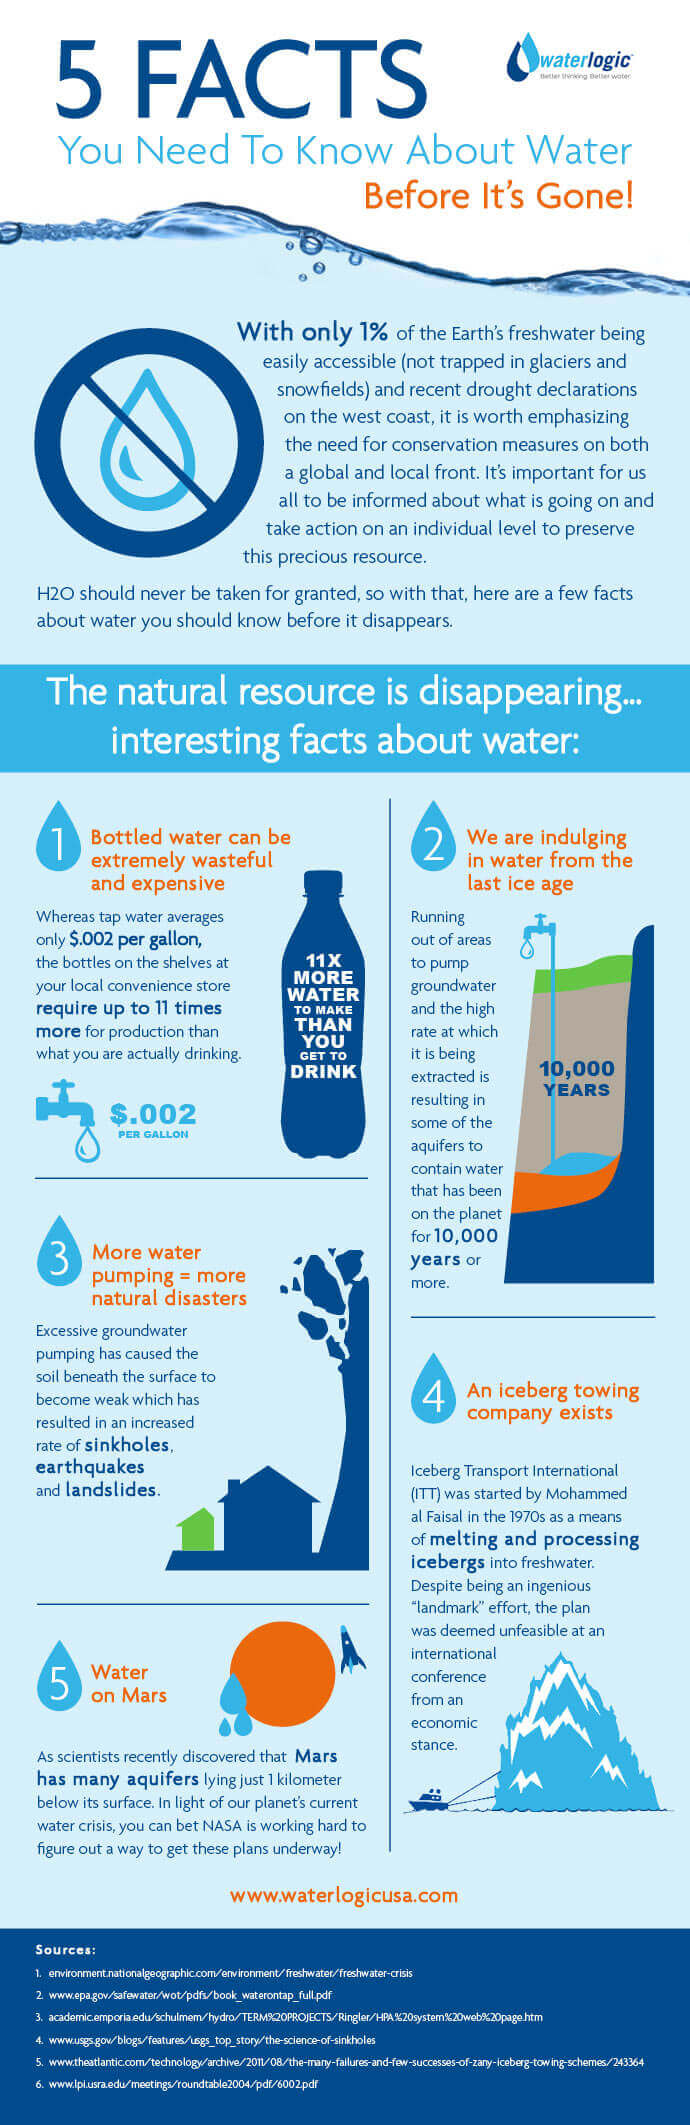 Water Properties and Facts You Should Know